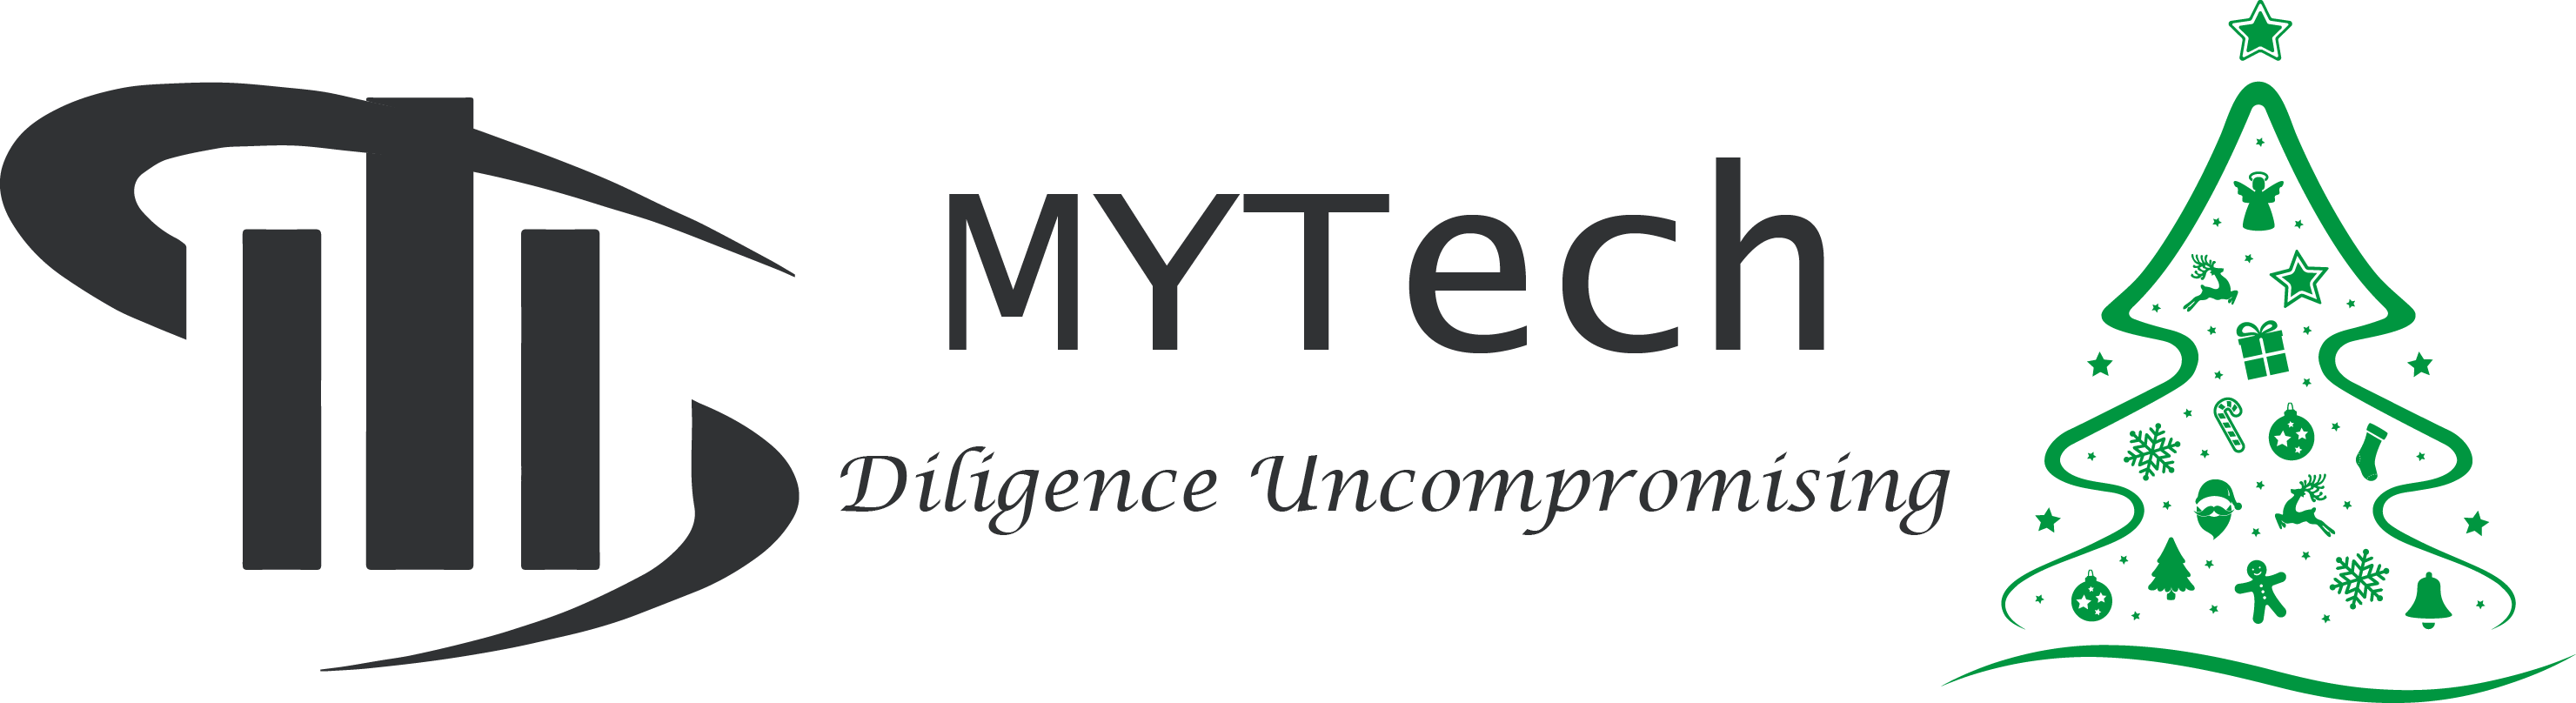 MyTech Solutions